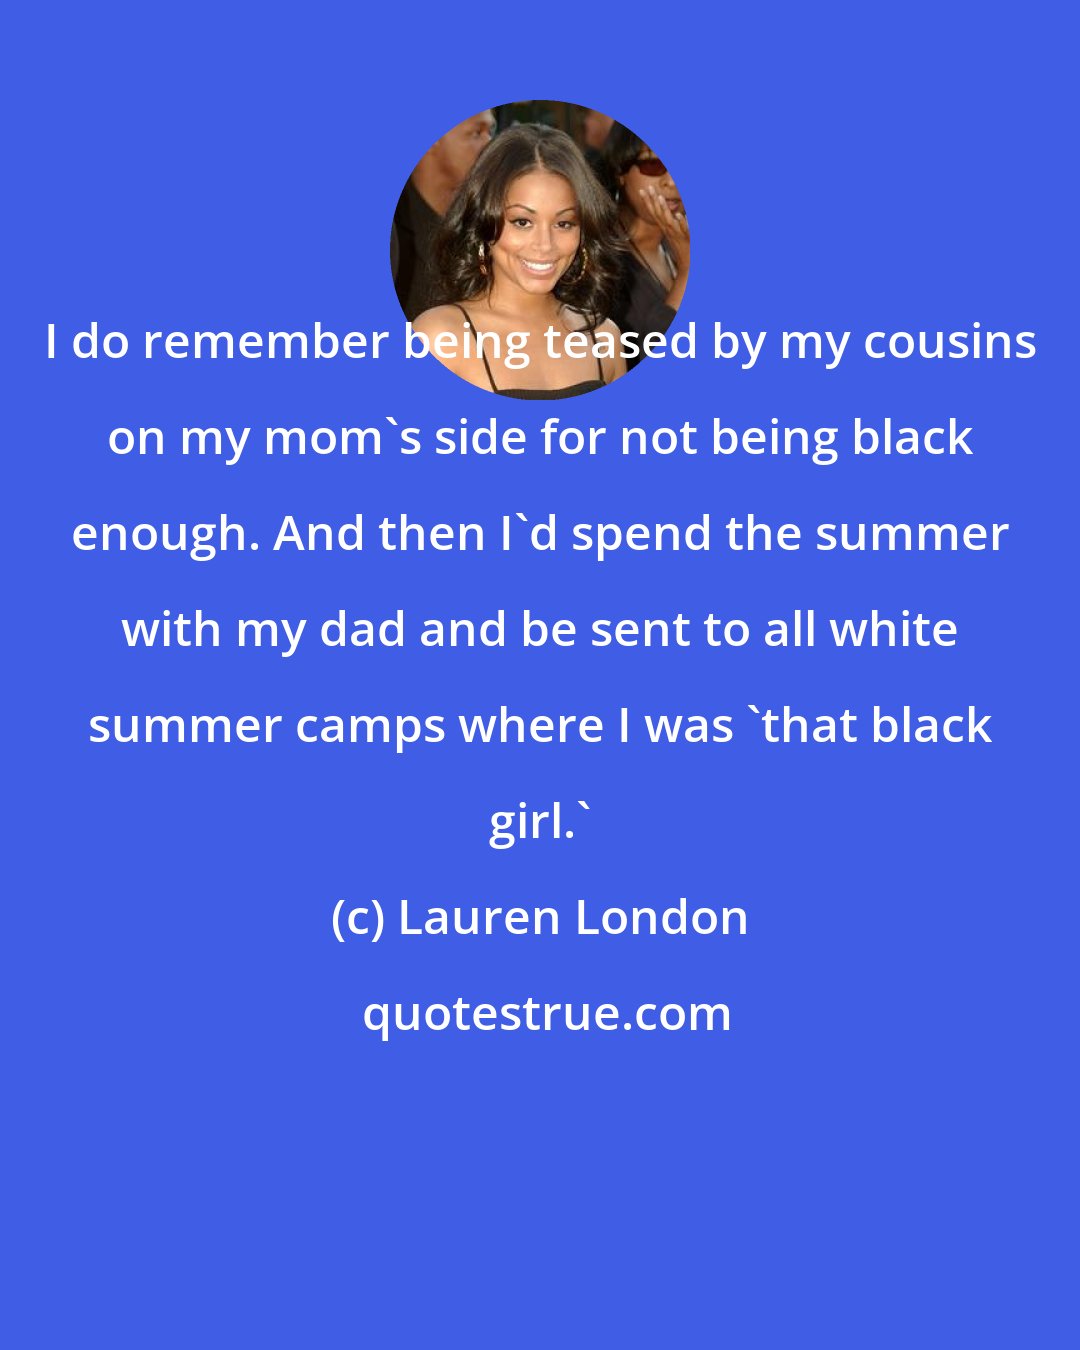 Lauren London: I do remember being teased by my cousins on my mom's side for not being black enough. And then I'd spend the summer with my dad and be sent to all white summer camps where I was 'that black girl.'